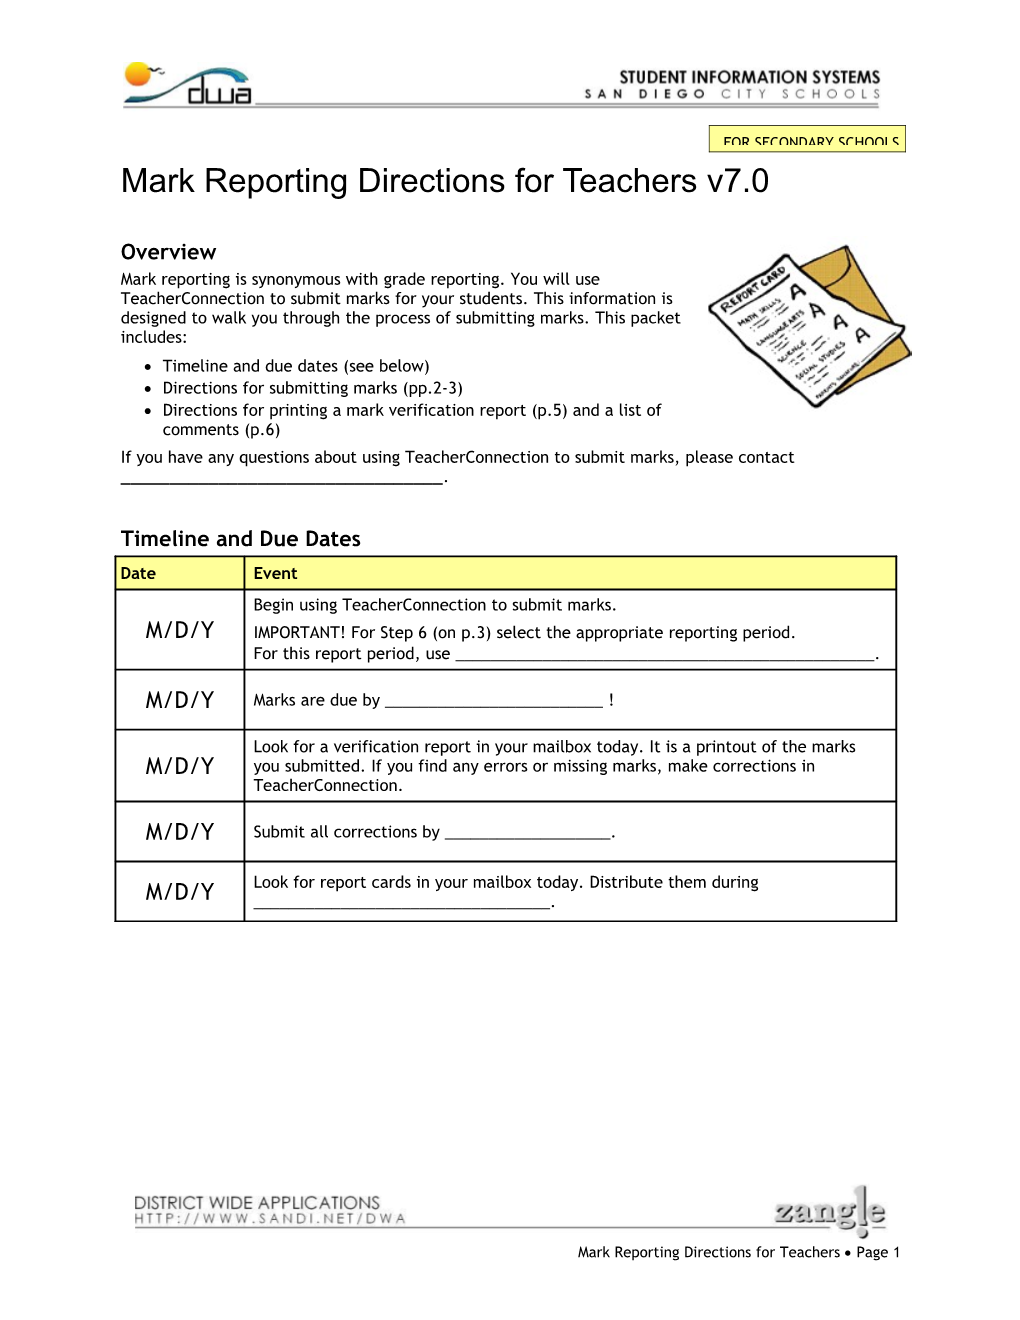 Mark Reporting Directions for Teachers